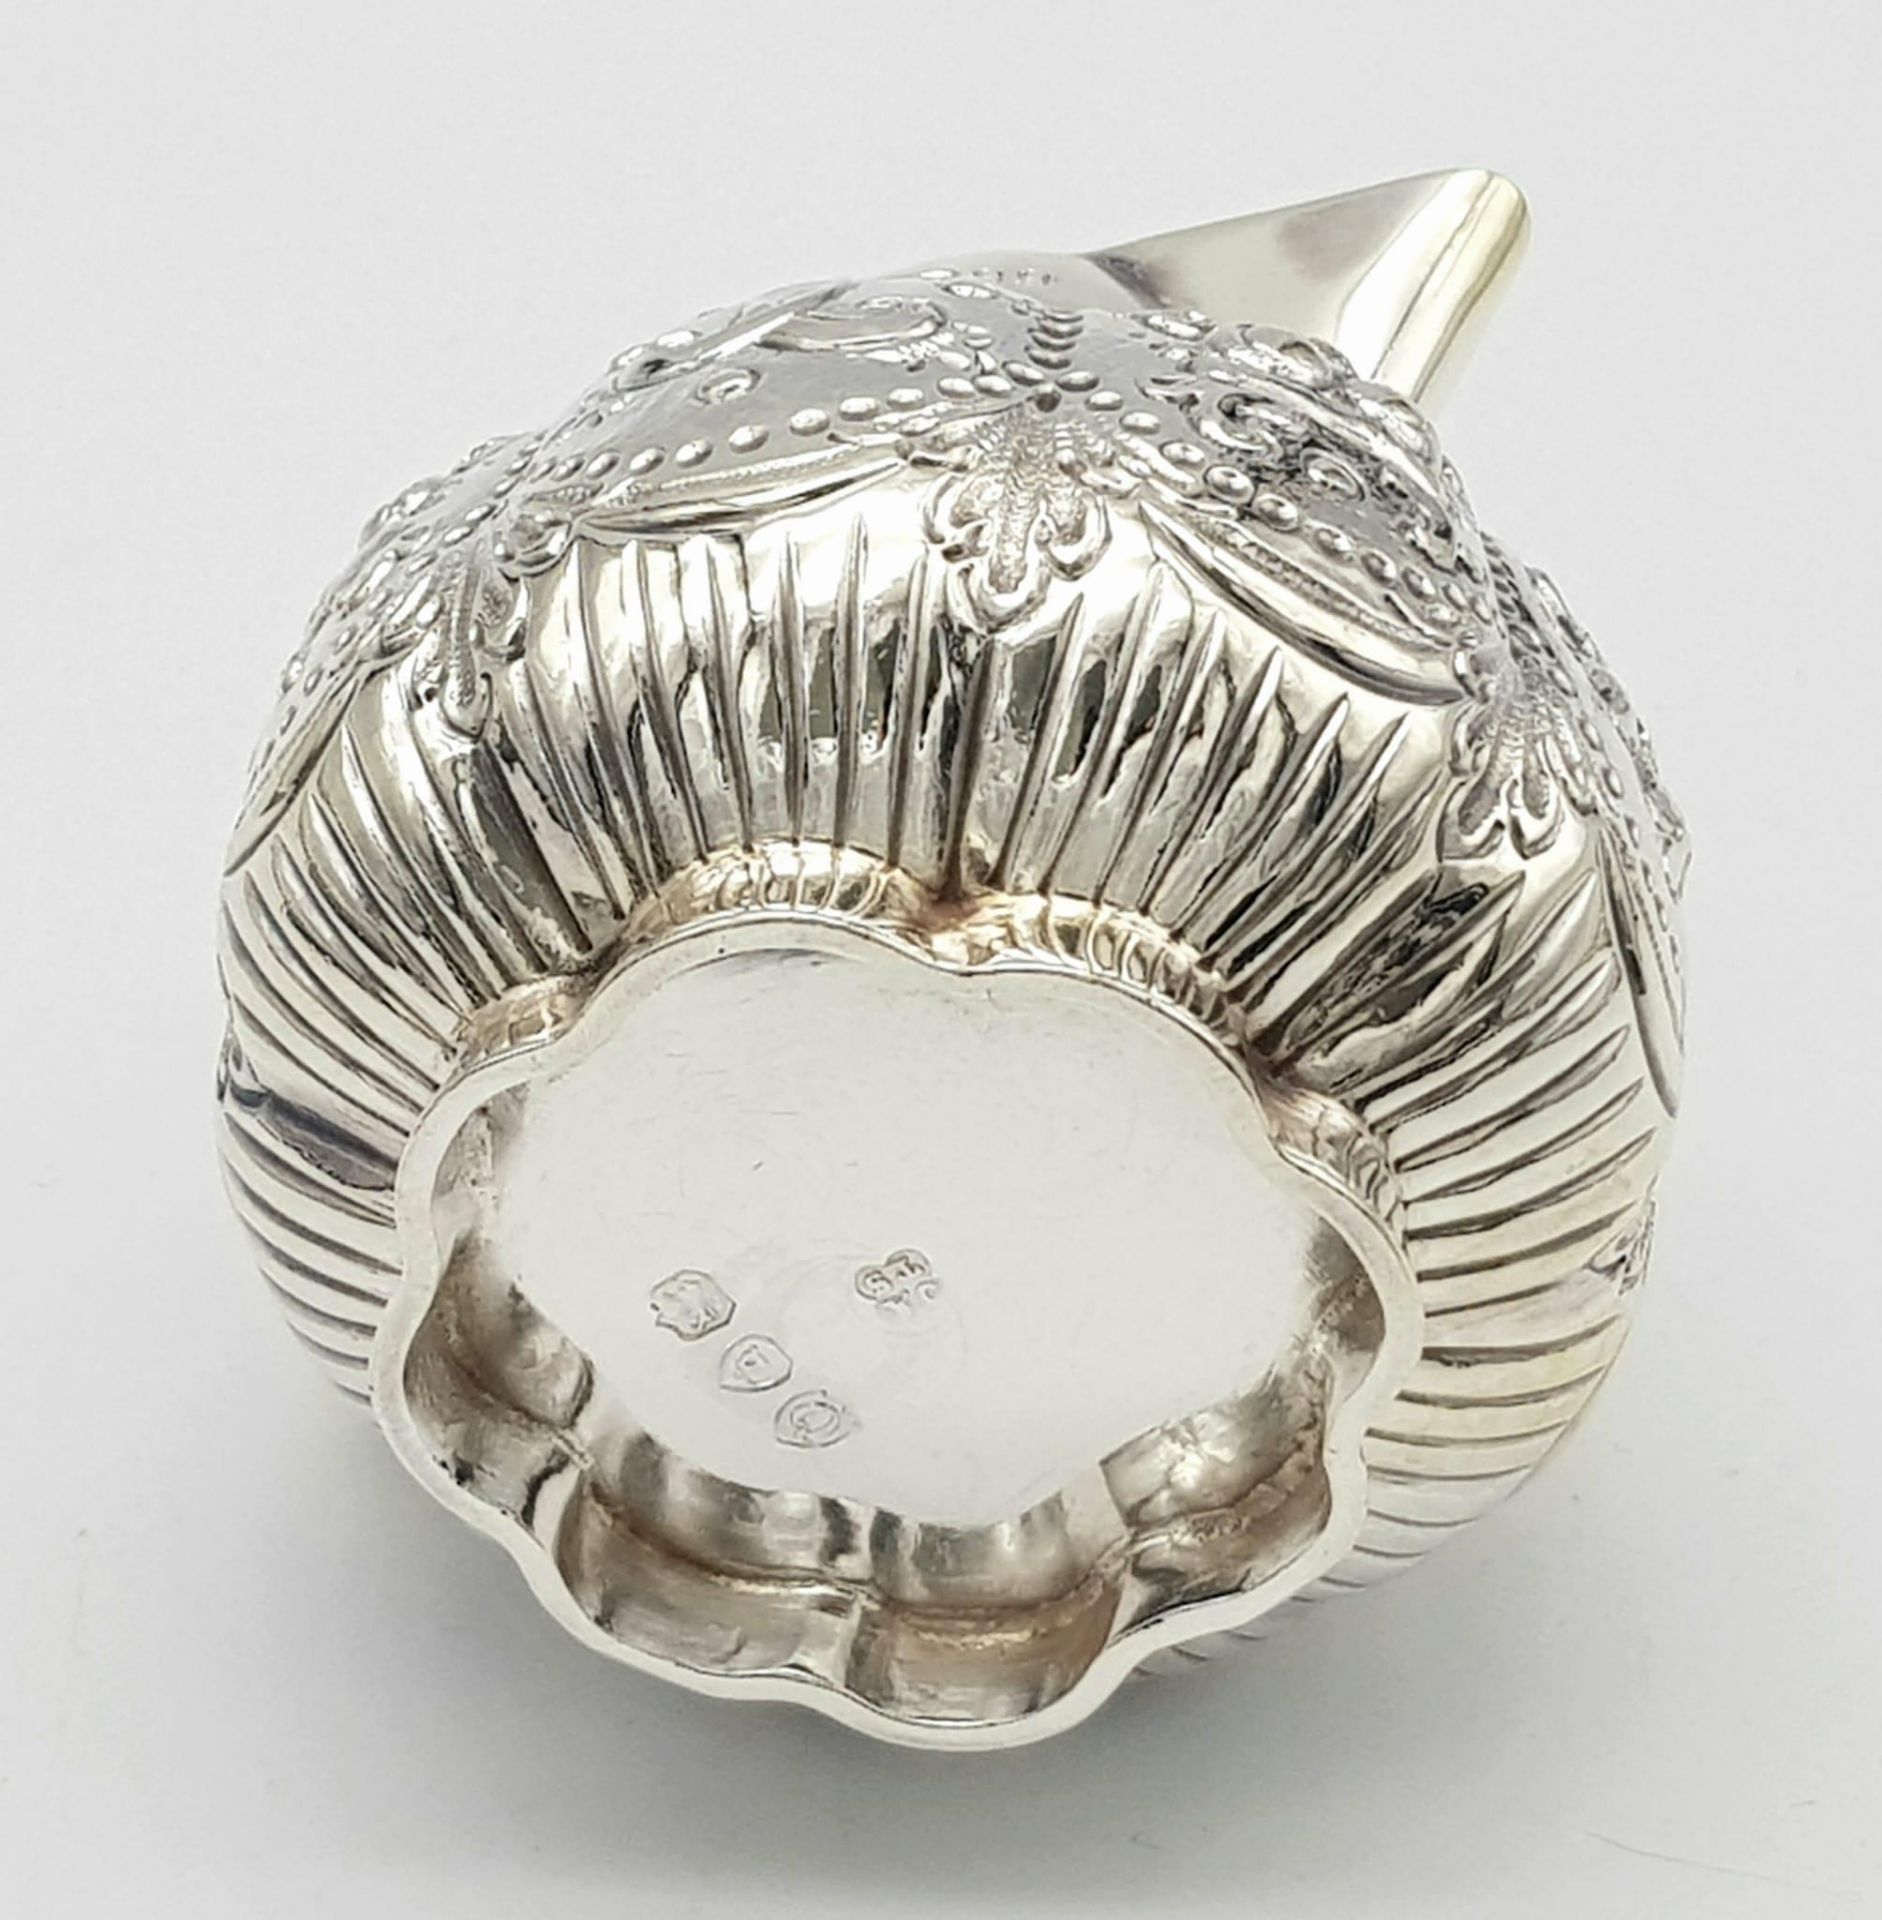 A SMALL SOLID SILVER JUG WITH THE INSCRIPTION "XMAS 1899" ALTHOUGH THE HALLMARK IS DATED 1891 WITH - Image 6 of 9